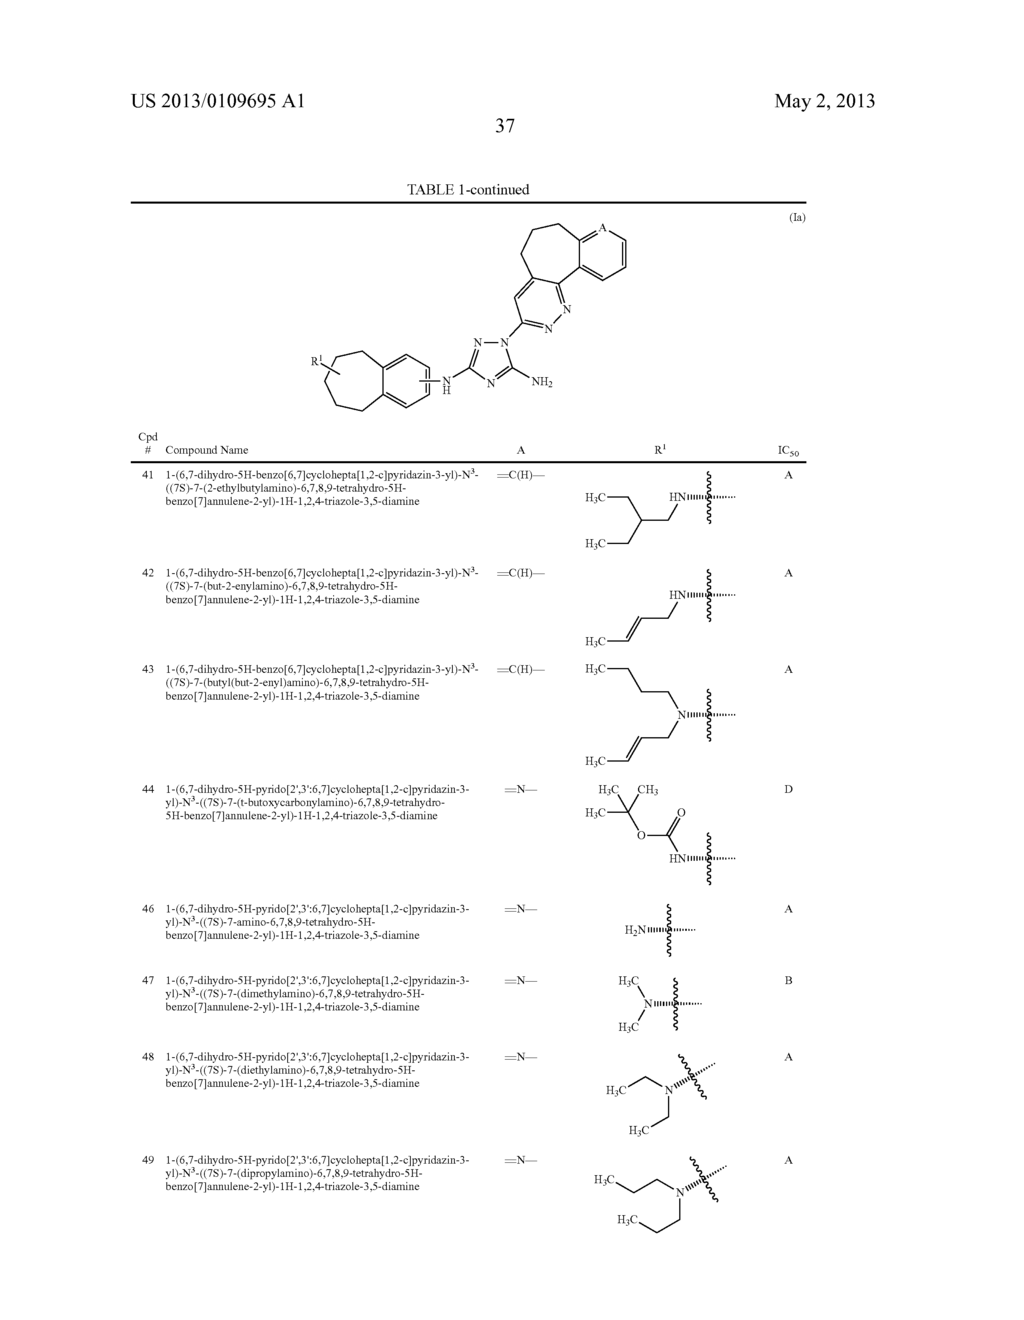 POLYCYCLIC HETEROARYL SUBSTITUTED TRIAZOLES USEFUL AS AXL INHIBITORS - diagram, schematic, and image 38